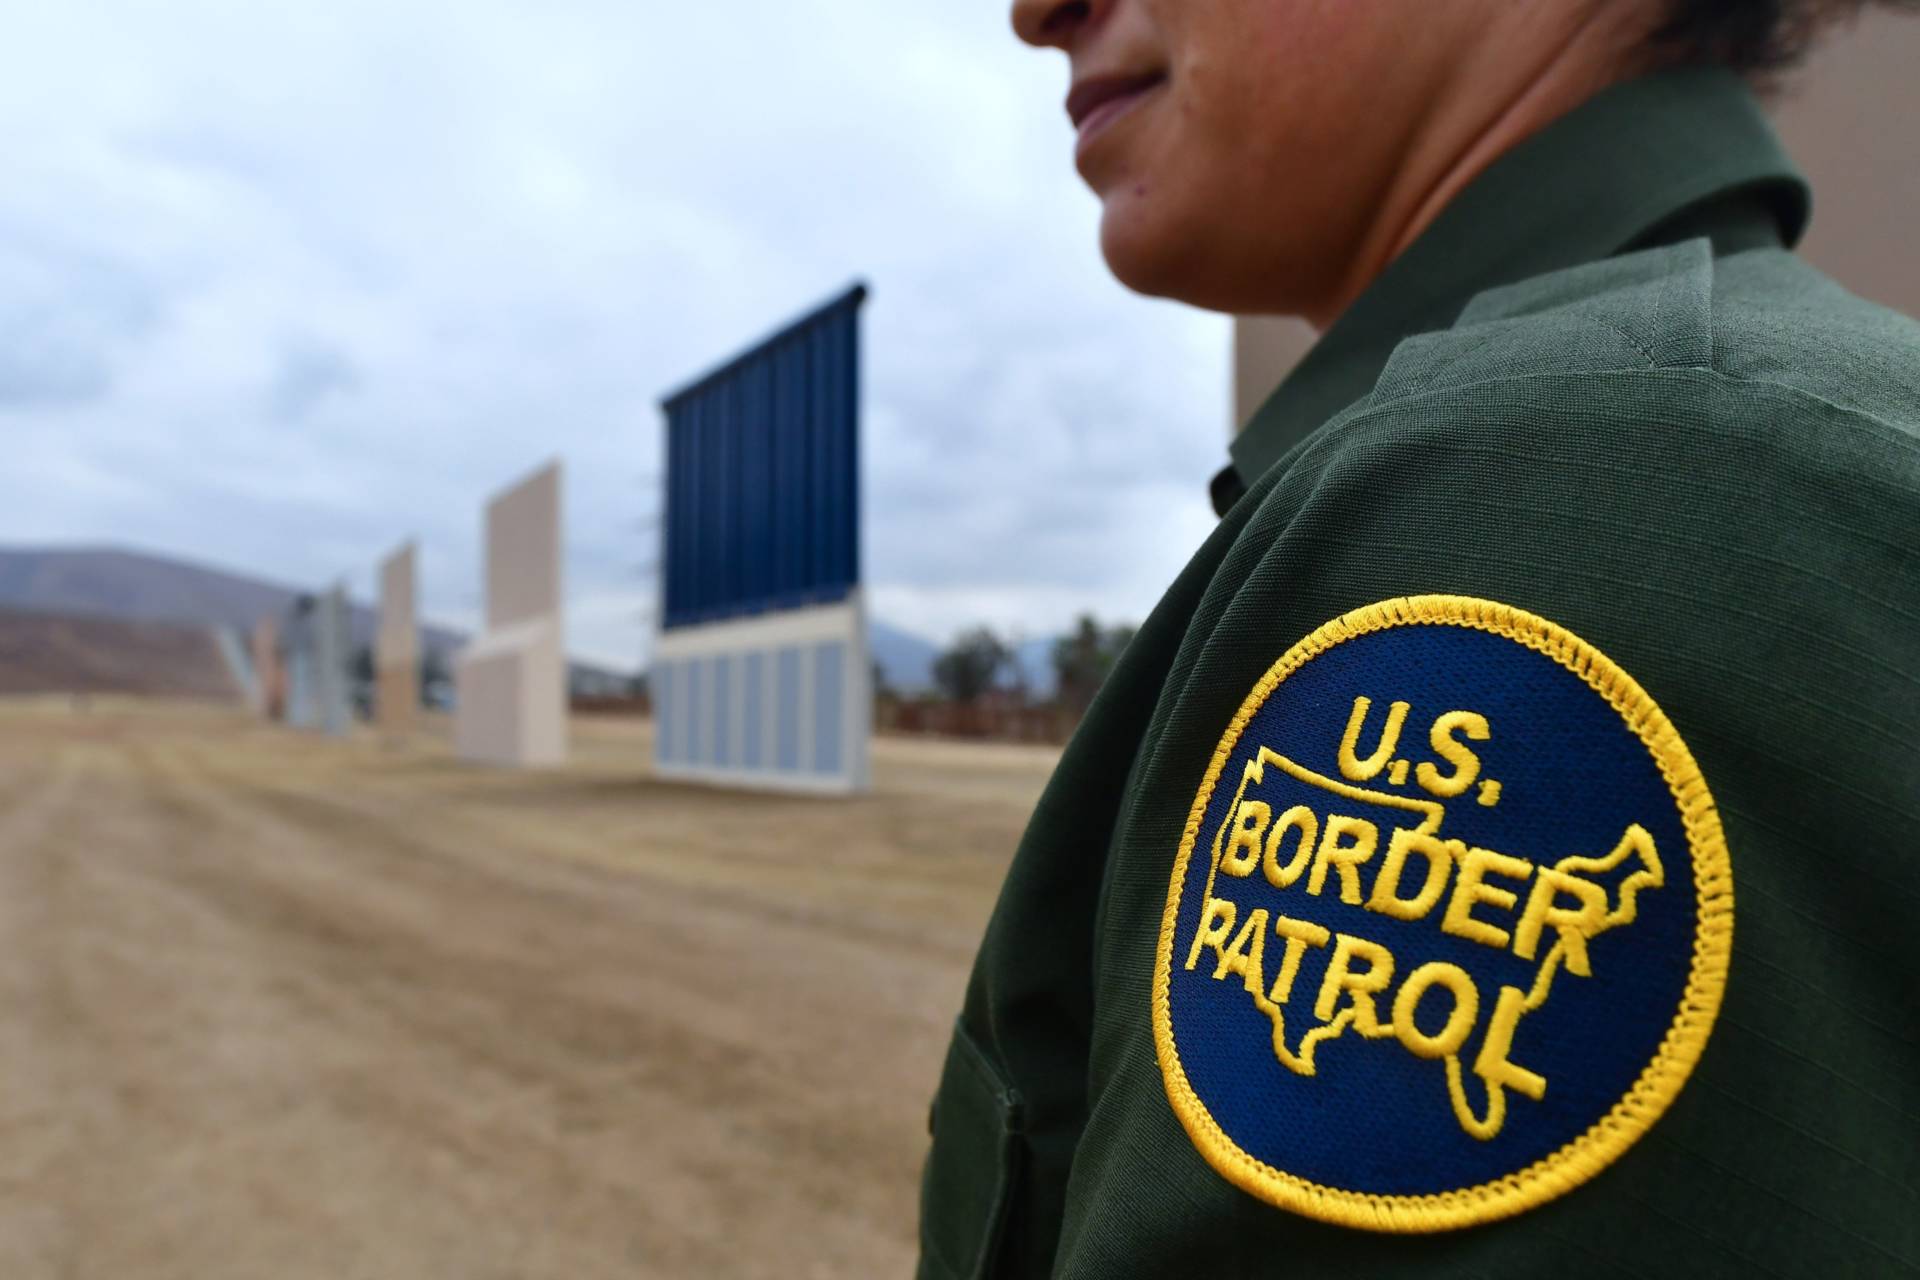 A U.S. Border Patrol officer stands near prototypes of President Trump's proposed border wall in San Diego. Border officers apprehended 310,531 people for being in the country illegally in fiscal 2017, a 25 percent decrease from the year before. Frederic J. Brown/AFP/Getty Images